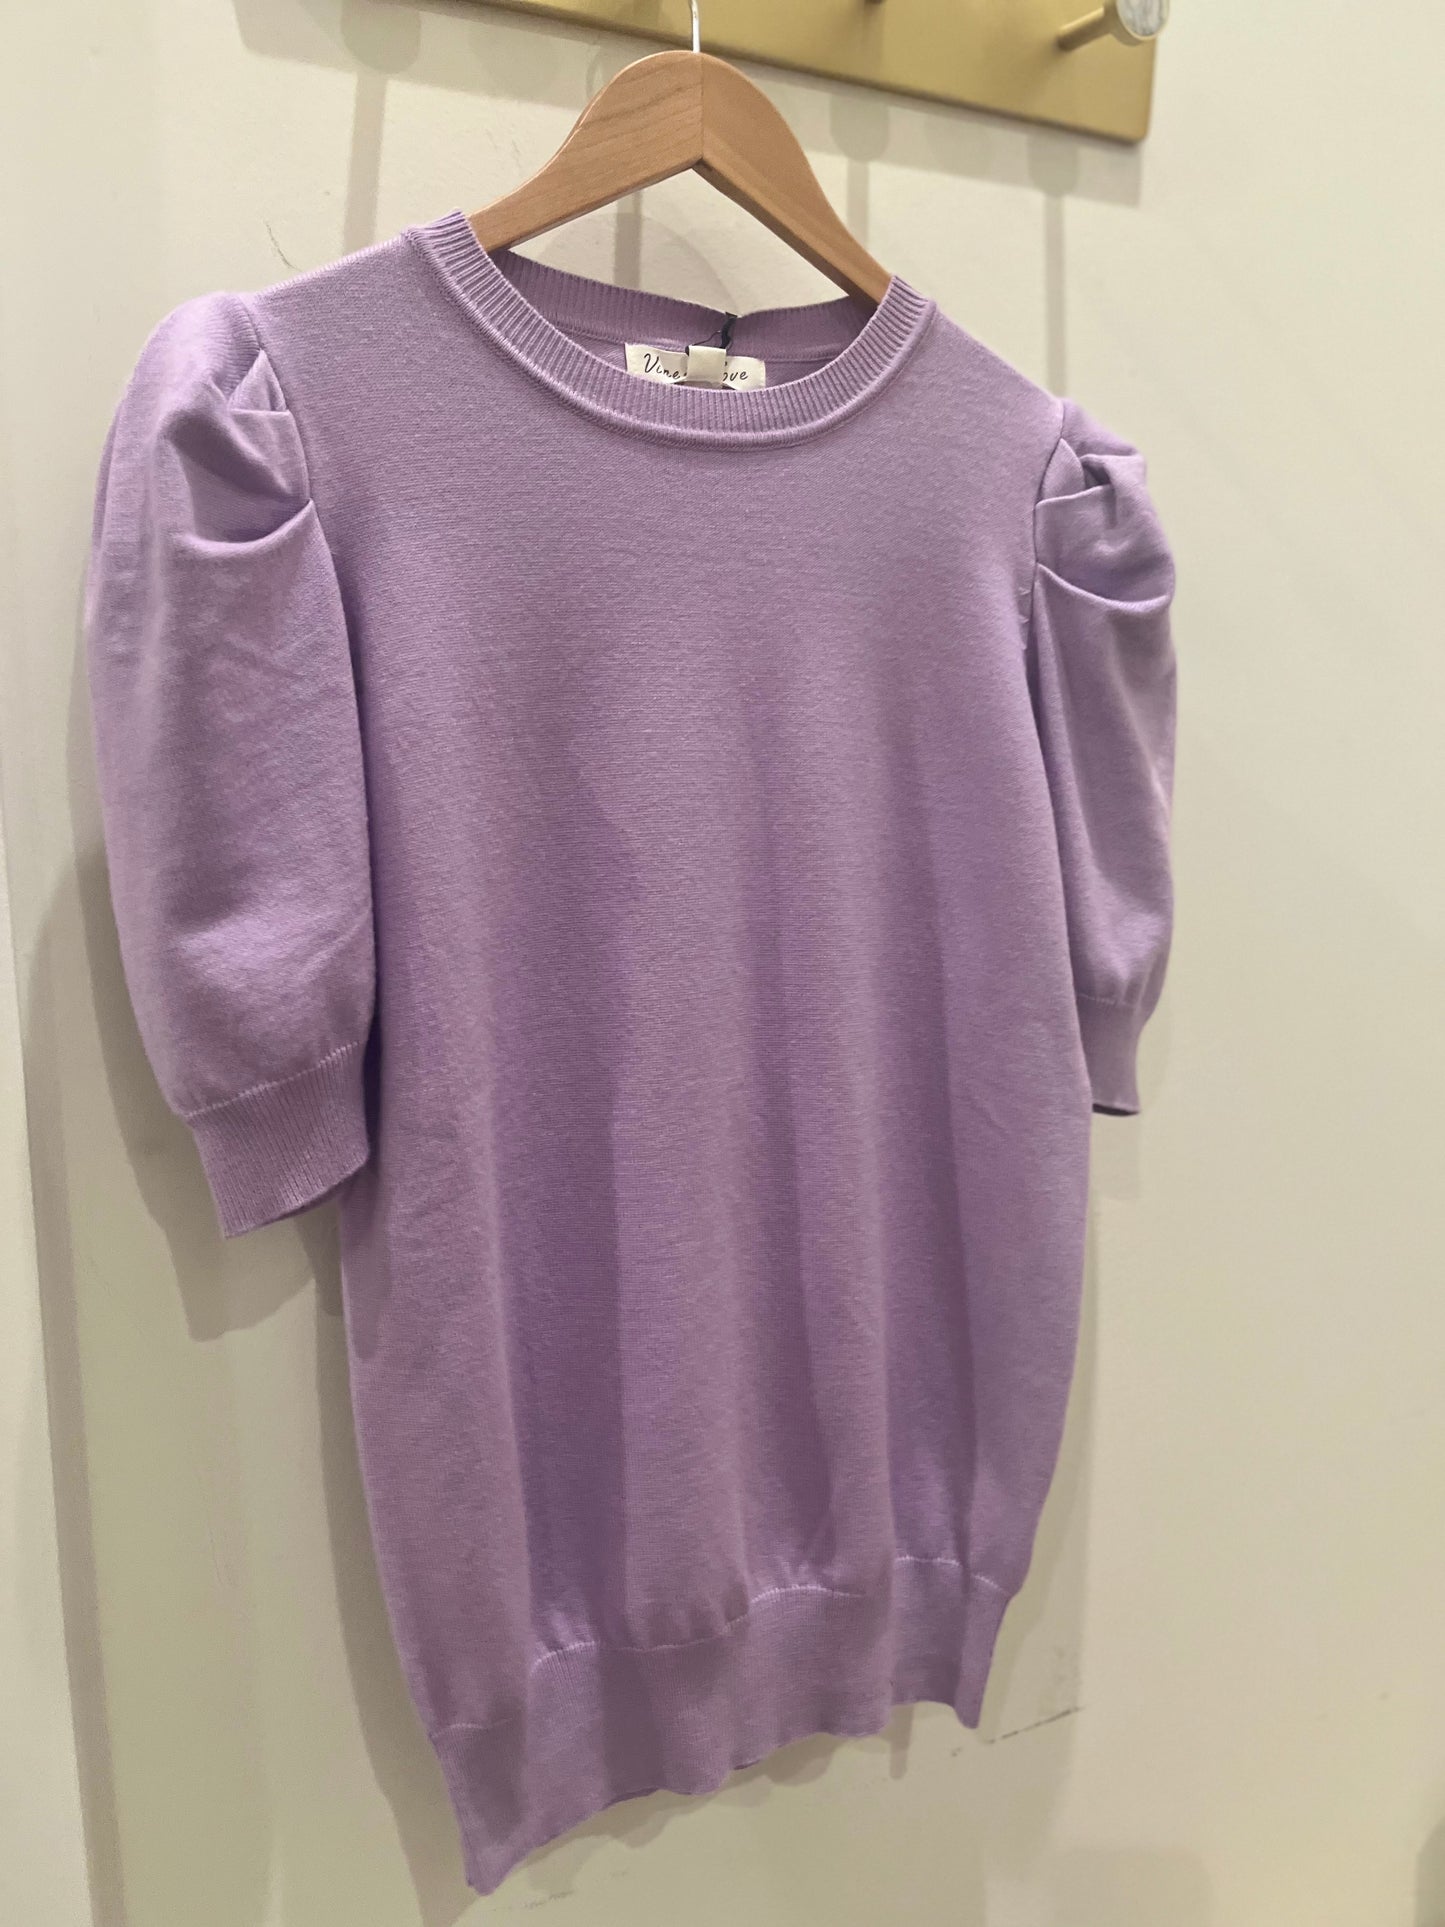 Violet Puffed Sleeve Top